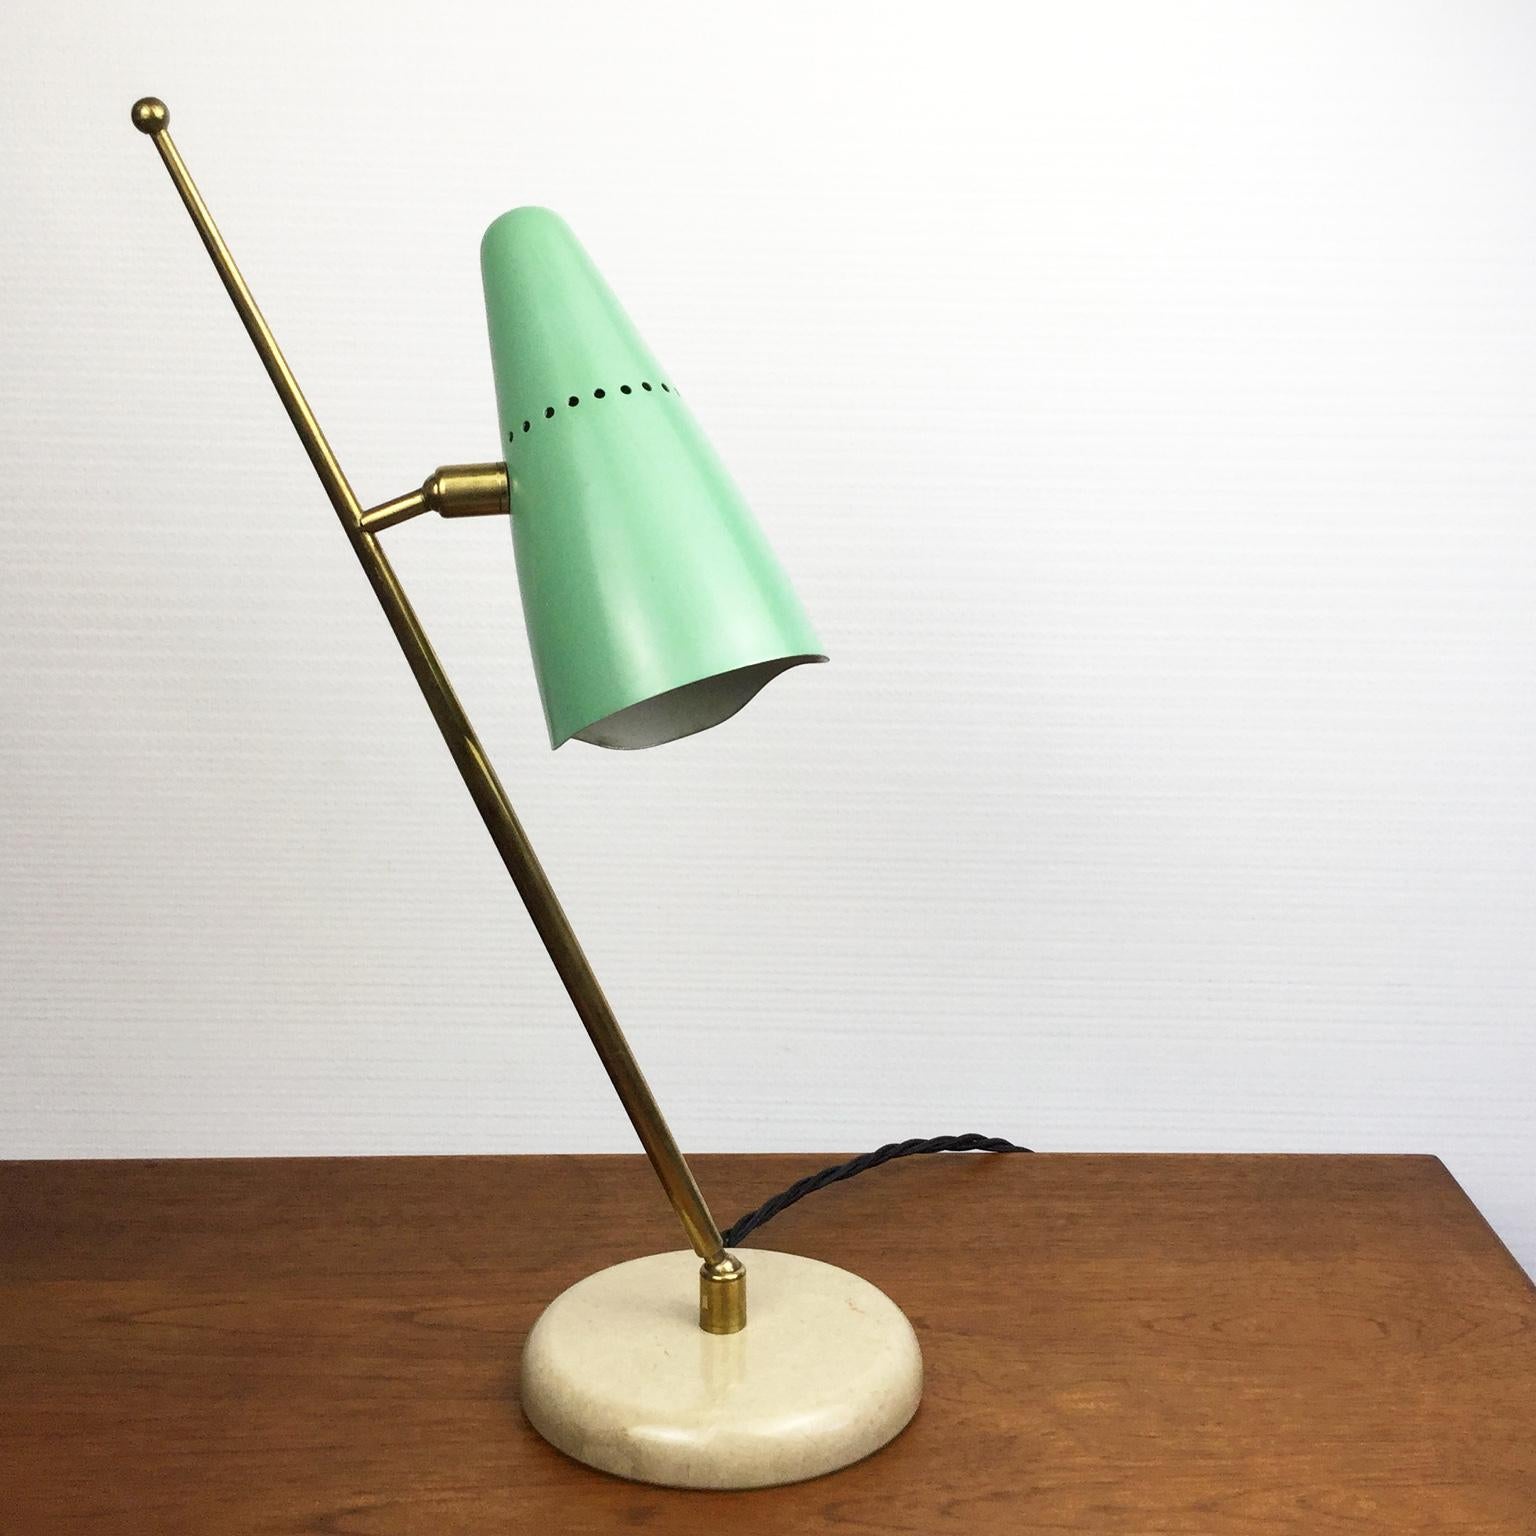 Italian table lamp with adjustable brass arm and shade on a marble base
Rewired with black cotton-insulated cable and line switch.